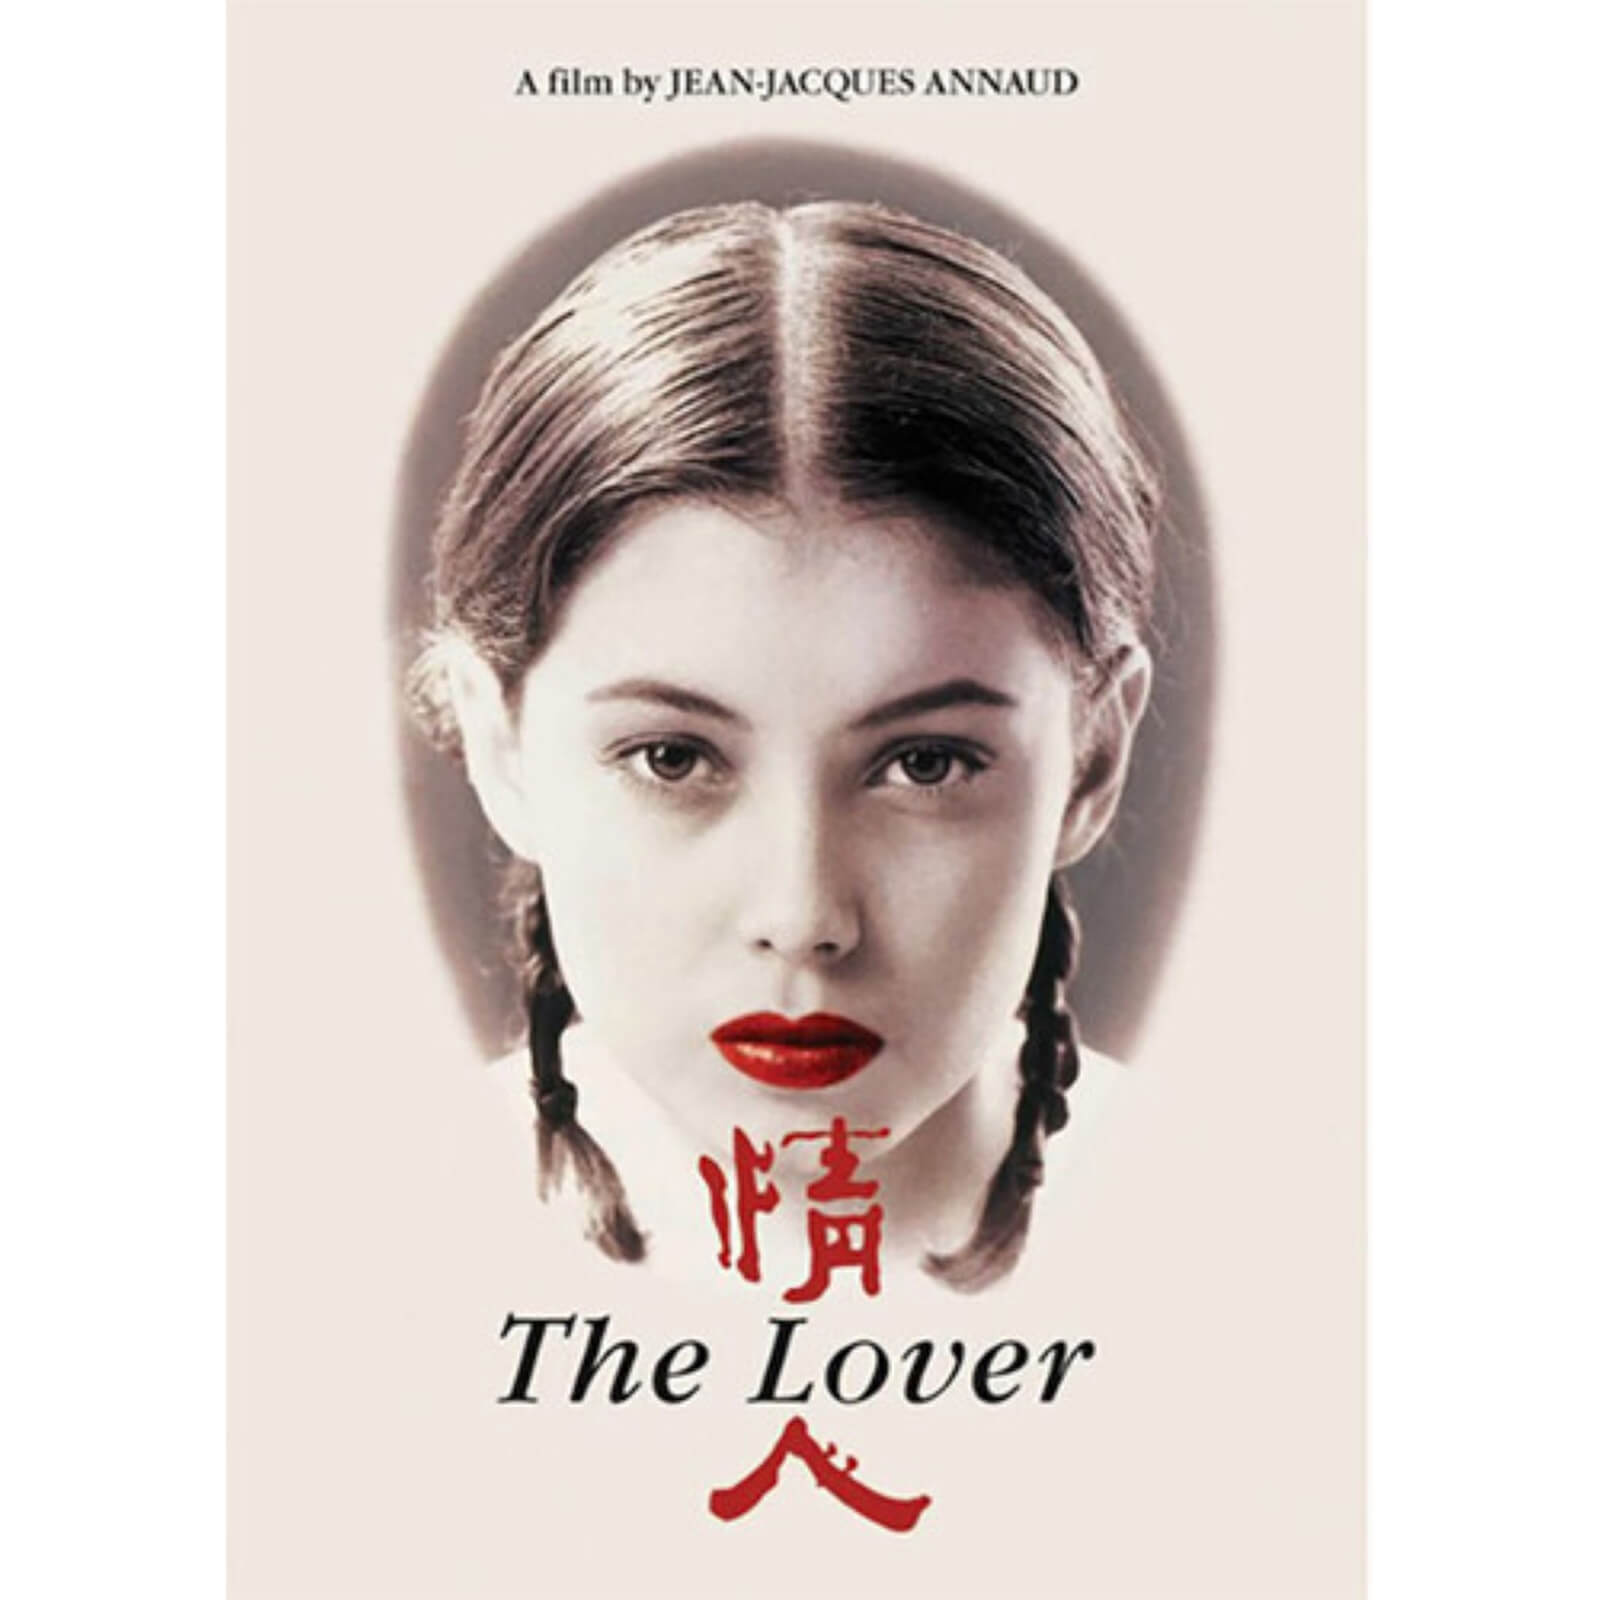 The Lover - 4K Ultra HD (Includes Blu-ray)